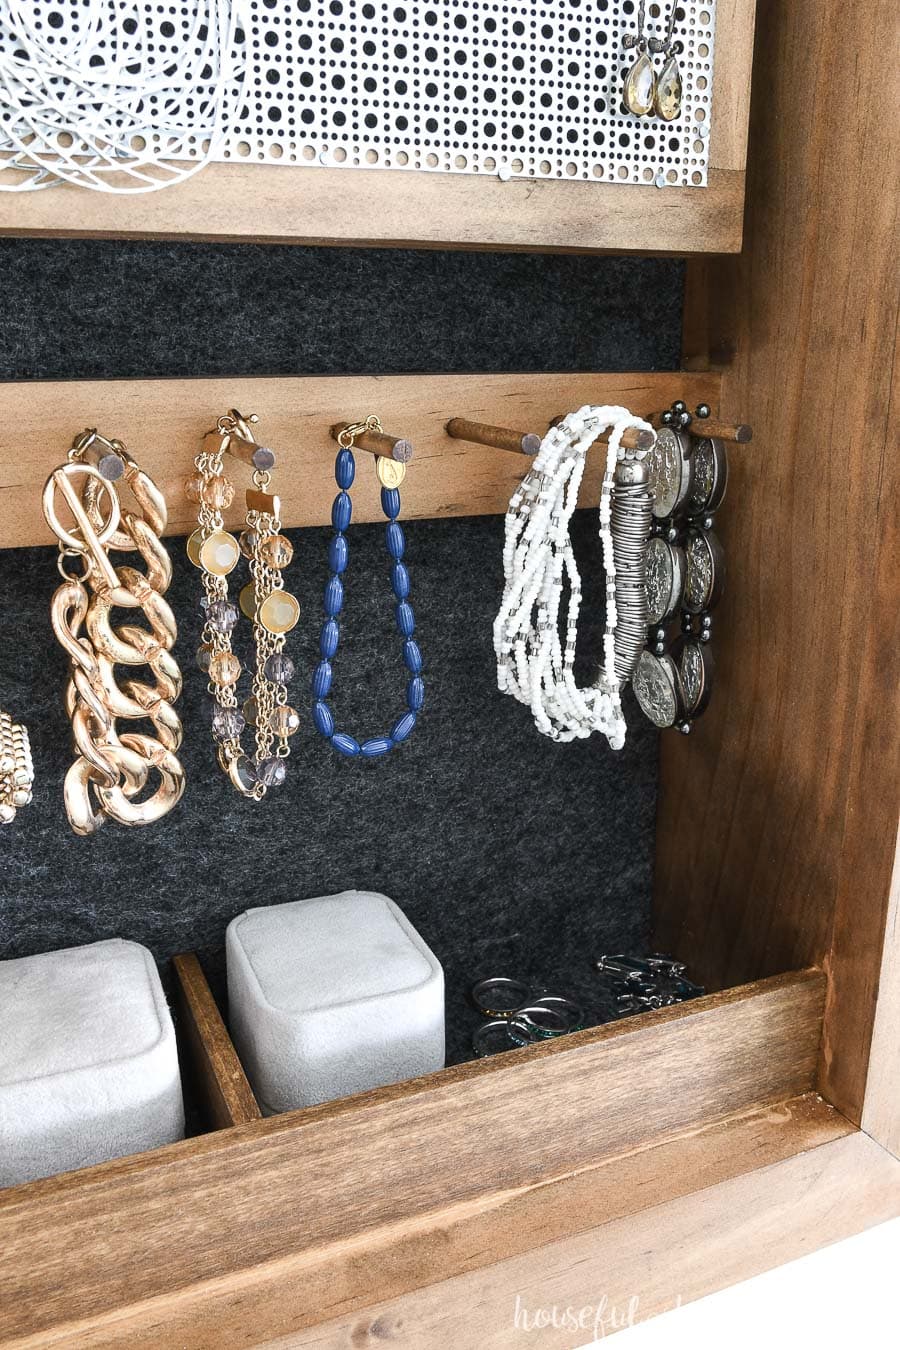 Close up view of bracelet hooks and ring compartments of the DIY wall jewelry organizer. 